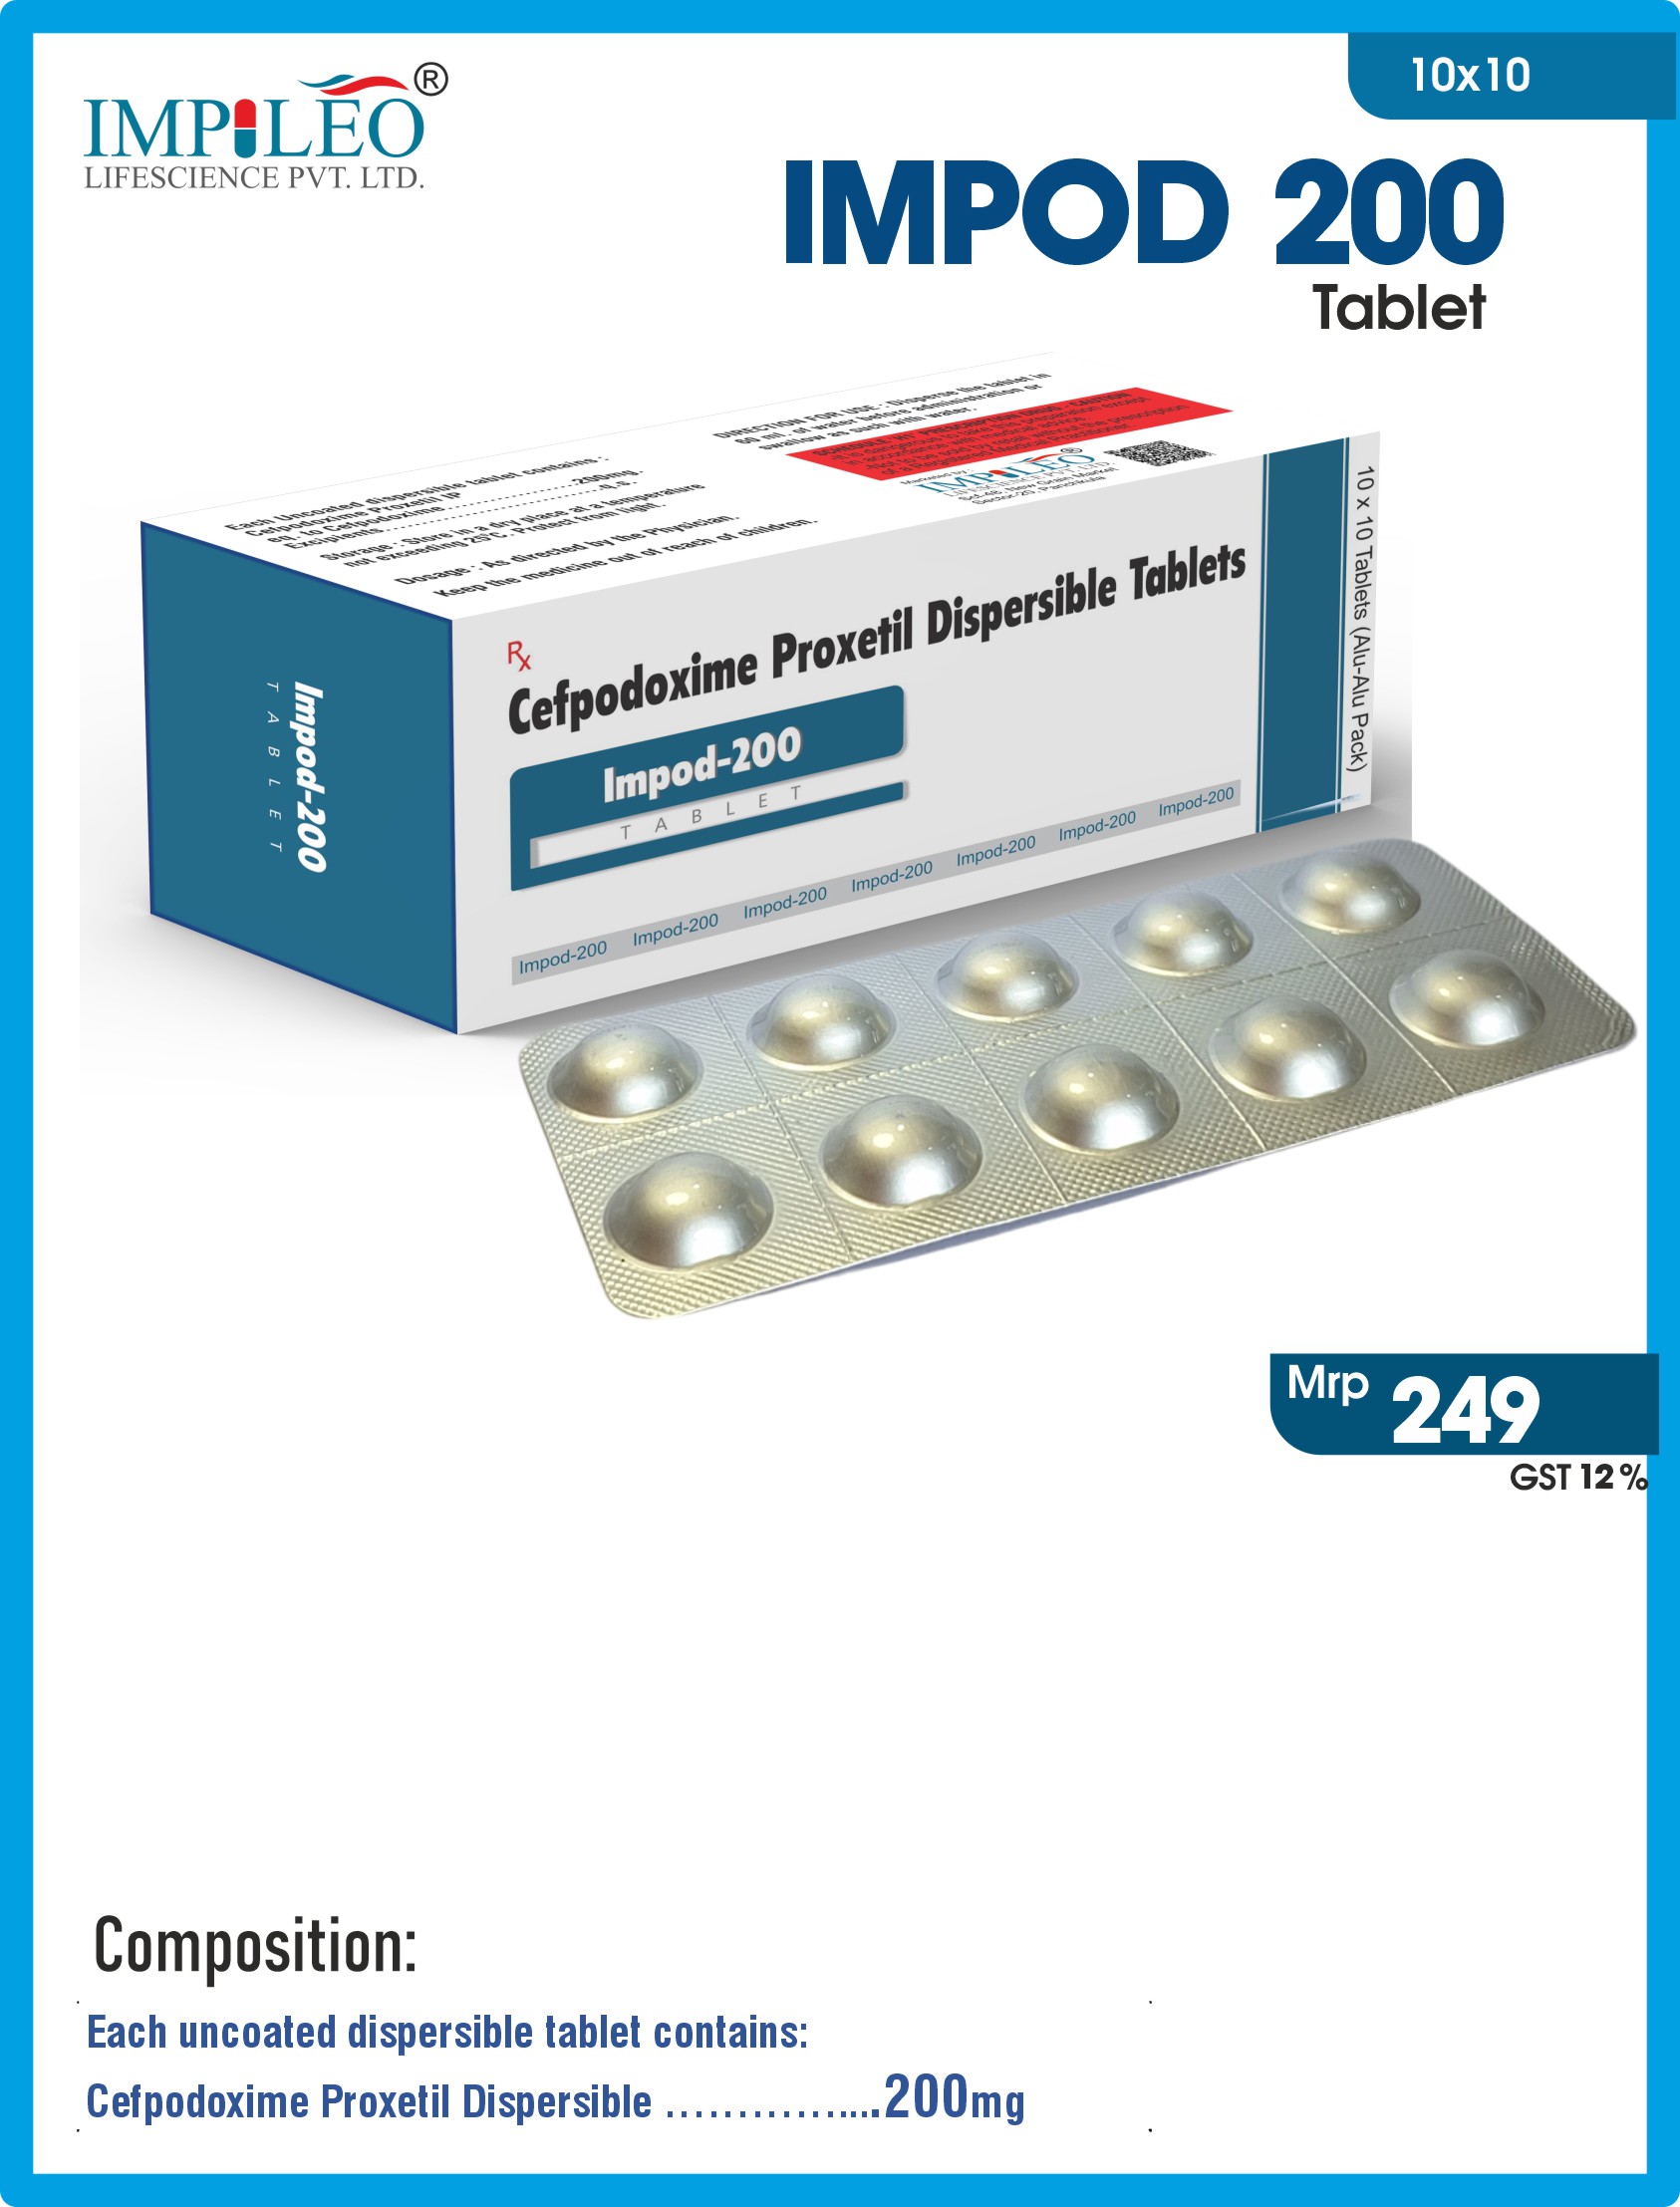 Reliable IMPOD 200 Tablets : Your Choice for PCD Pharma Franchise in Chandigarh